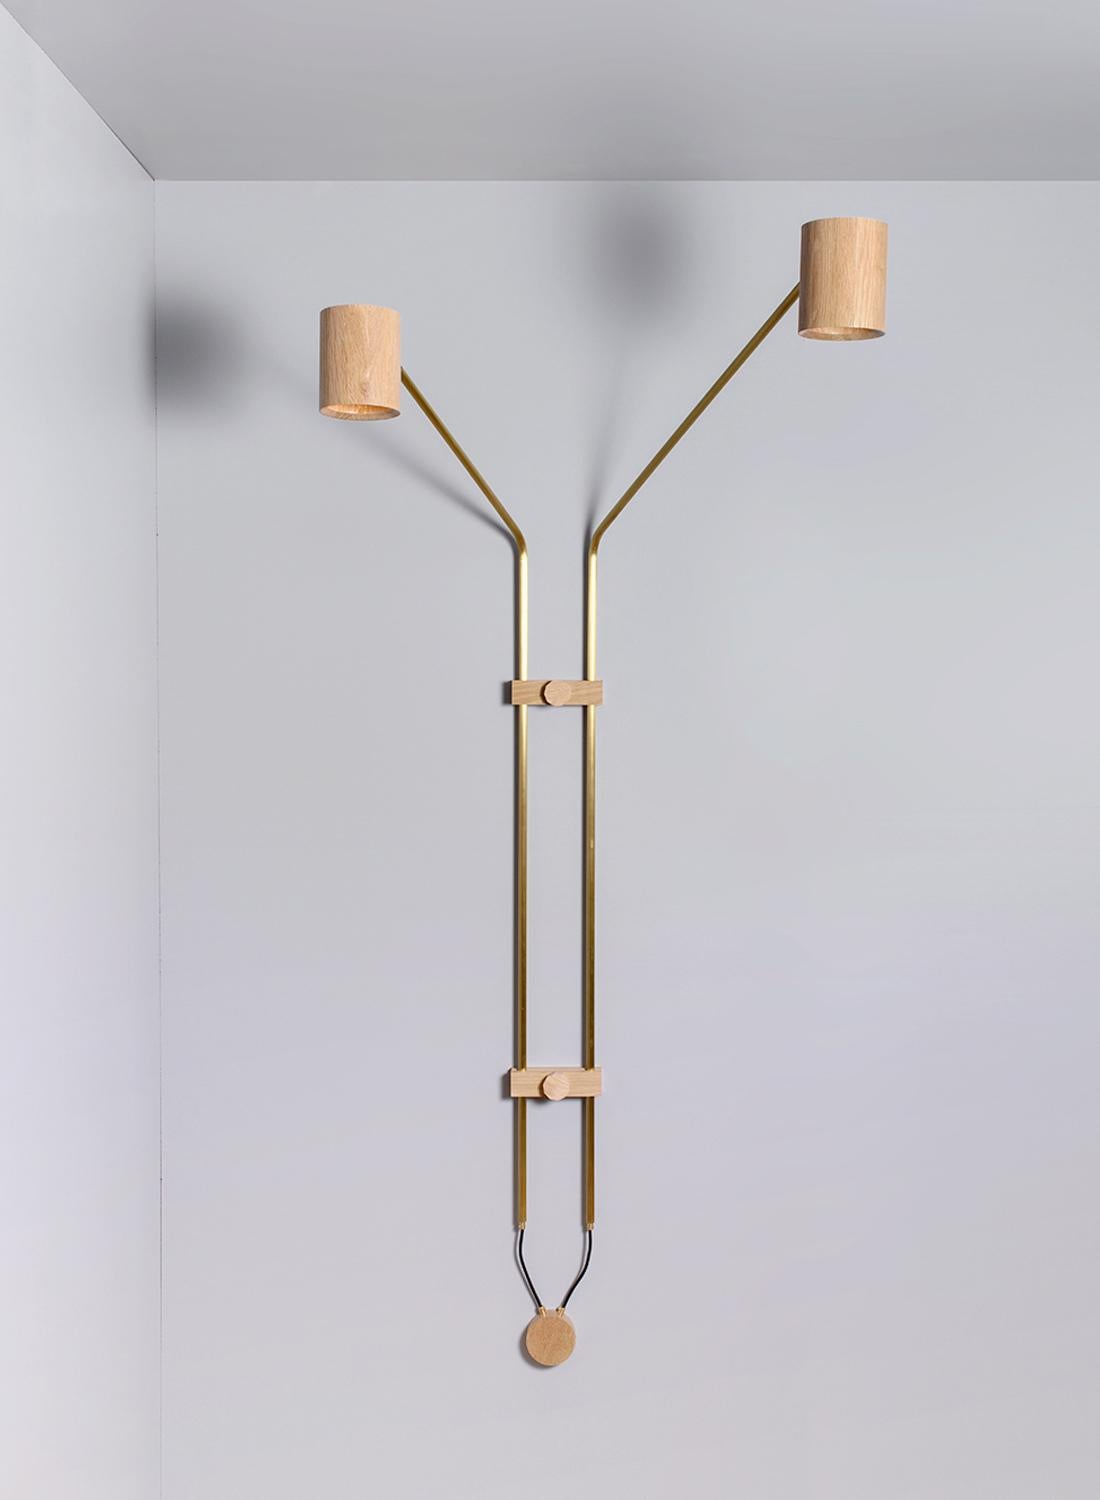 Brass 2 spot wall lamp by ASAF Weinbroom Studio
Dimensions: 181 x 80 x 17 cm
Materials: Brass + Wood

Canopy: Oak
Wattage / Type socket: 15w Max Led / E27
ASAF WEINBROOM studio was established in 2009.

All our lamps can be wired according